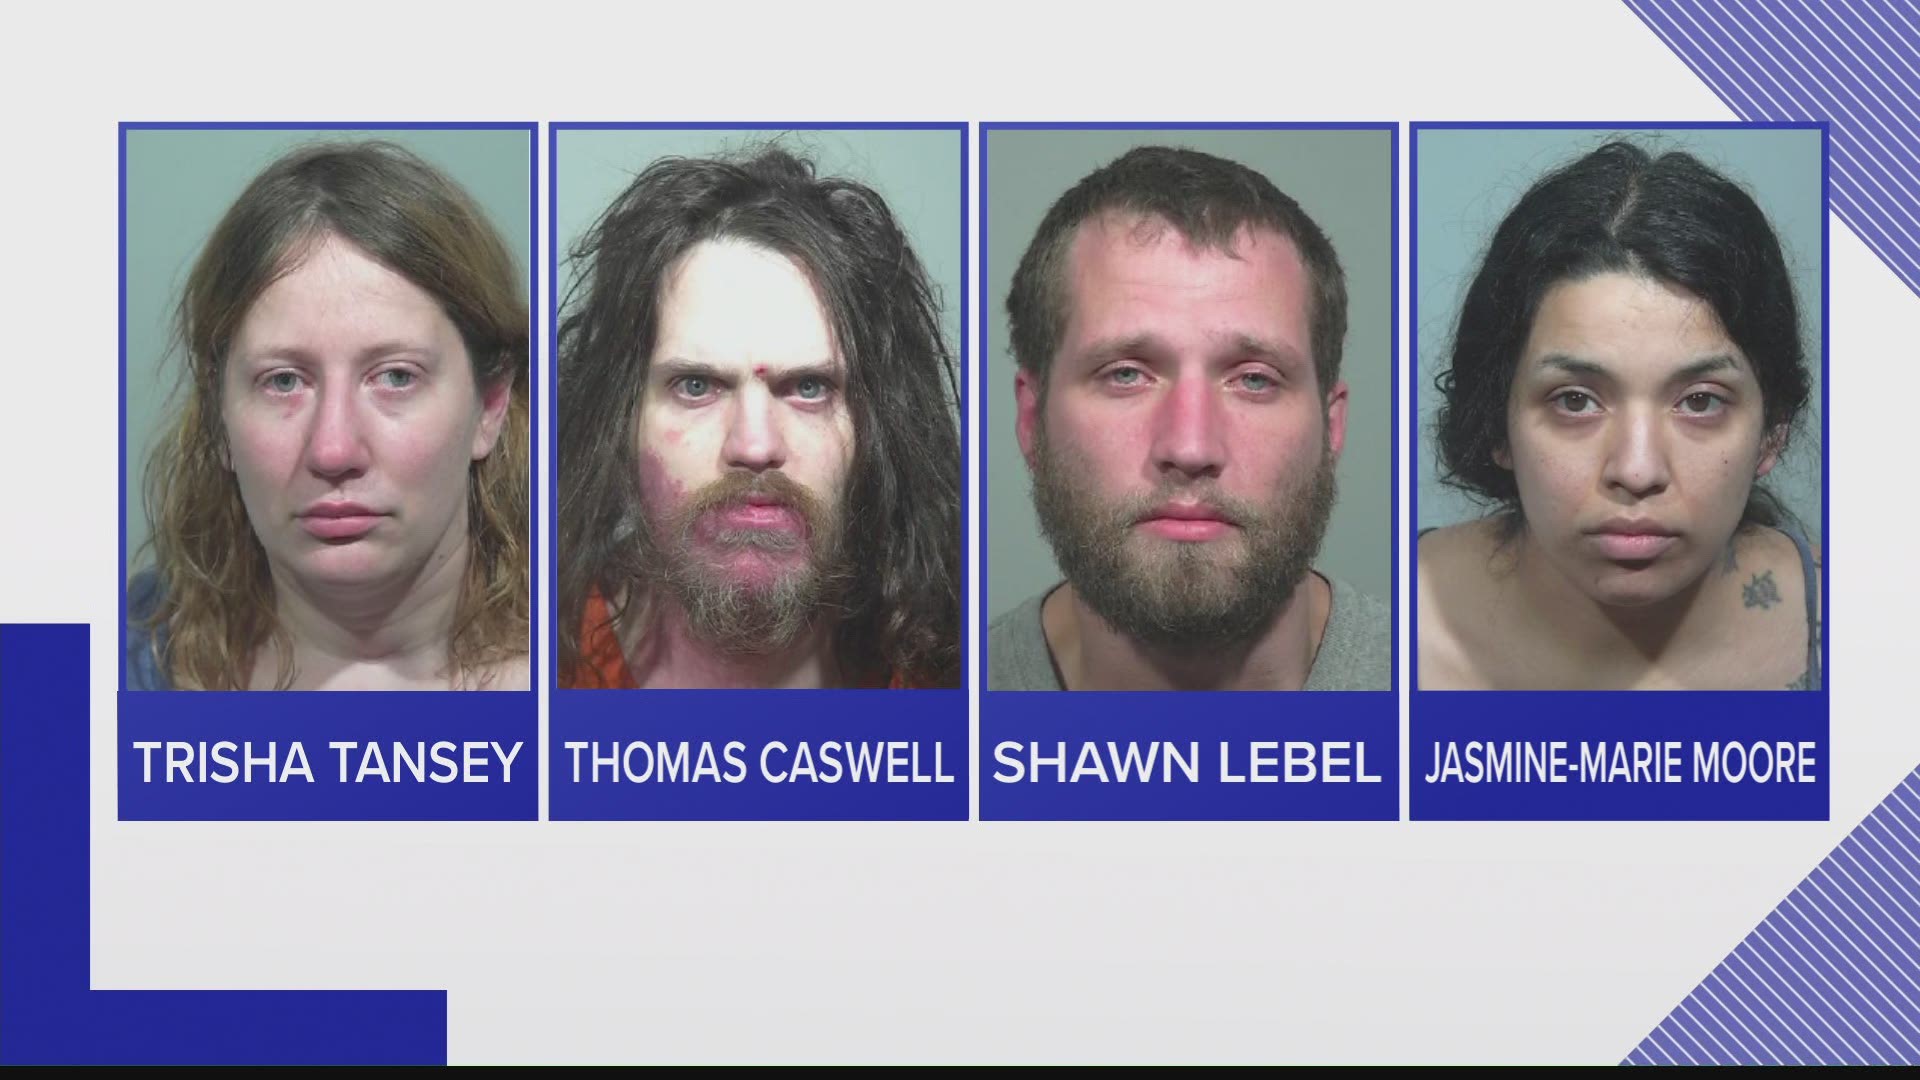 Officers with the Cumberland county Sherrif's Office say they've made four arrests involving a significant amount of drugs and guns.